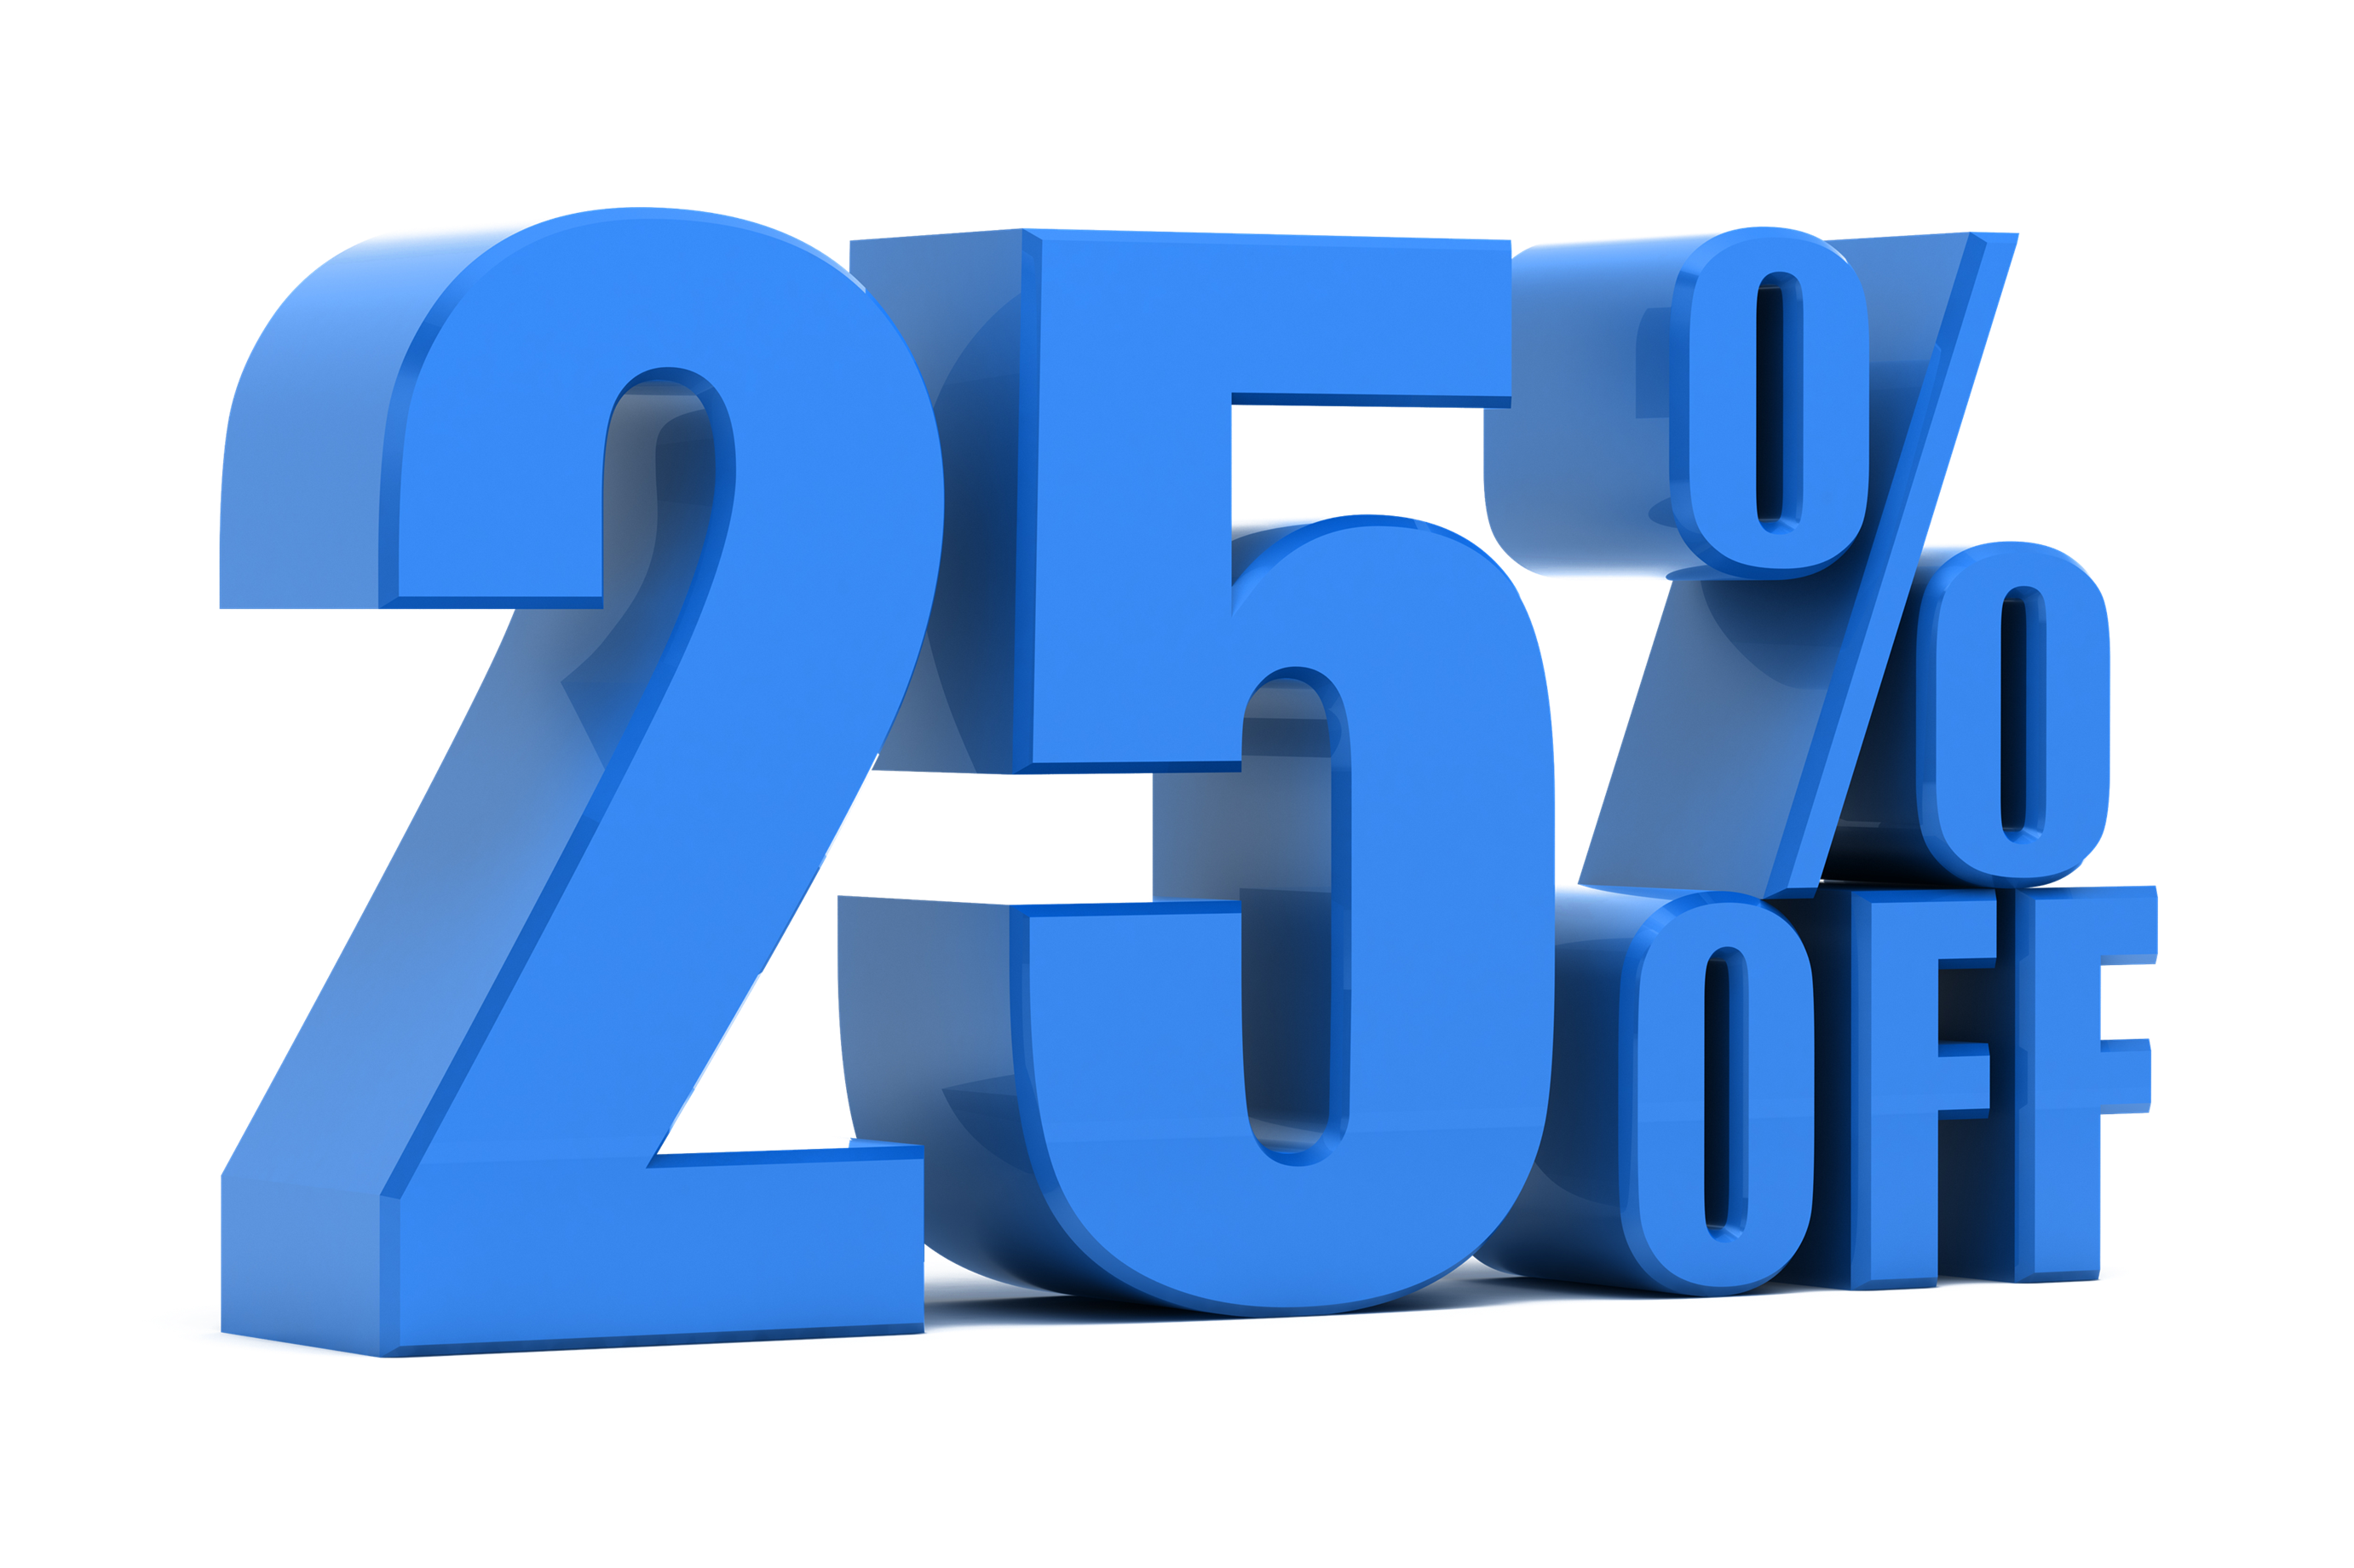 25%OFF Full October Month